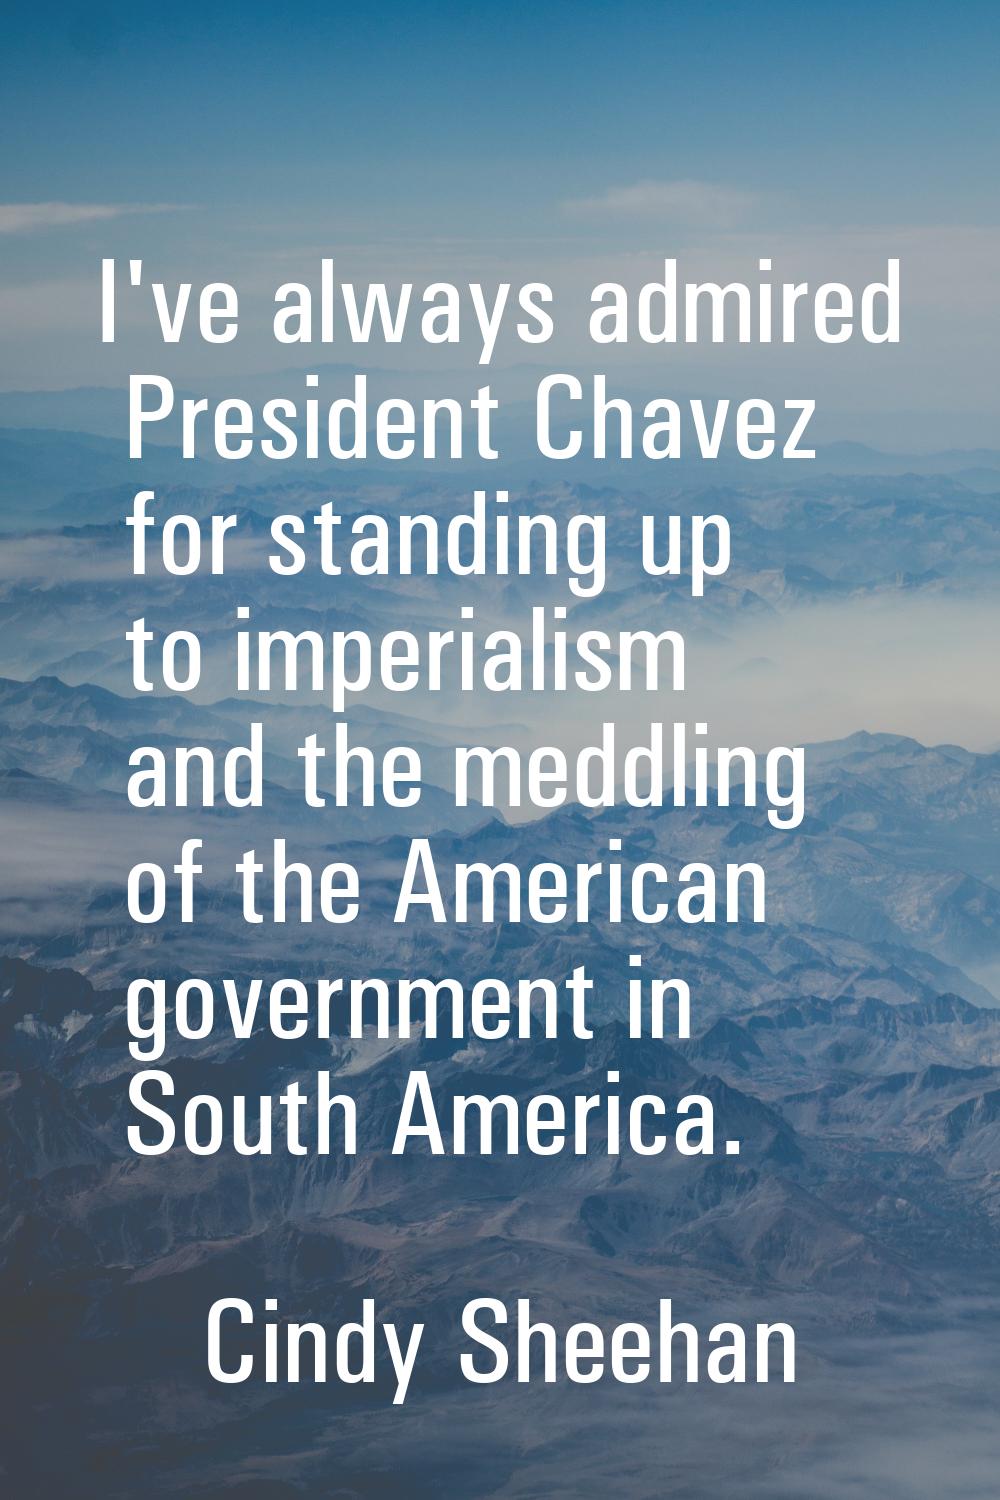 I've always admired President Chavez for standing up to imperialism and the meddling of the America